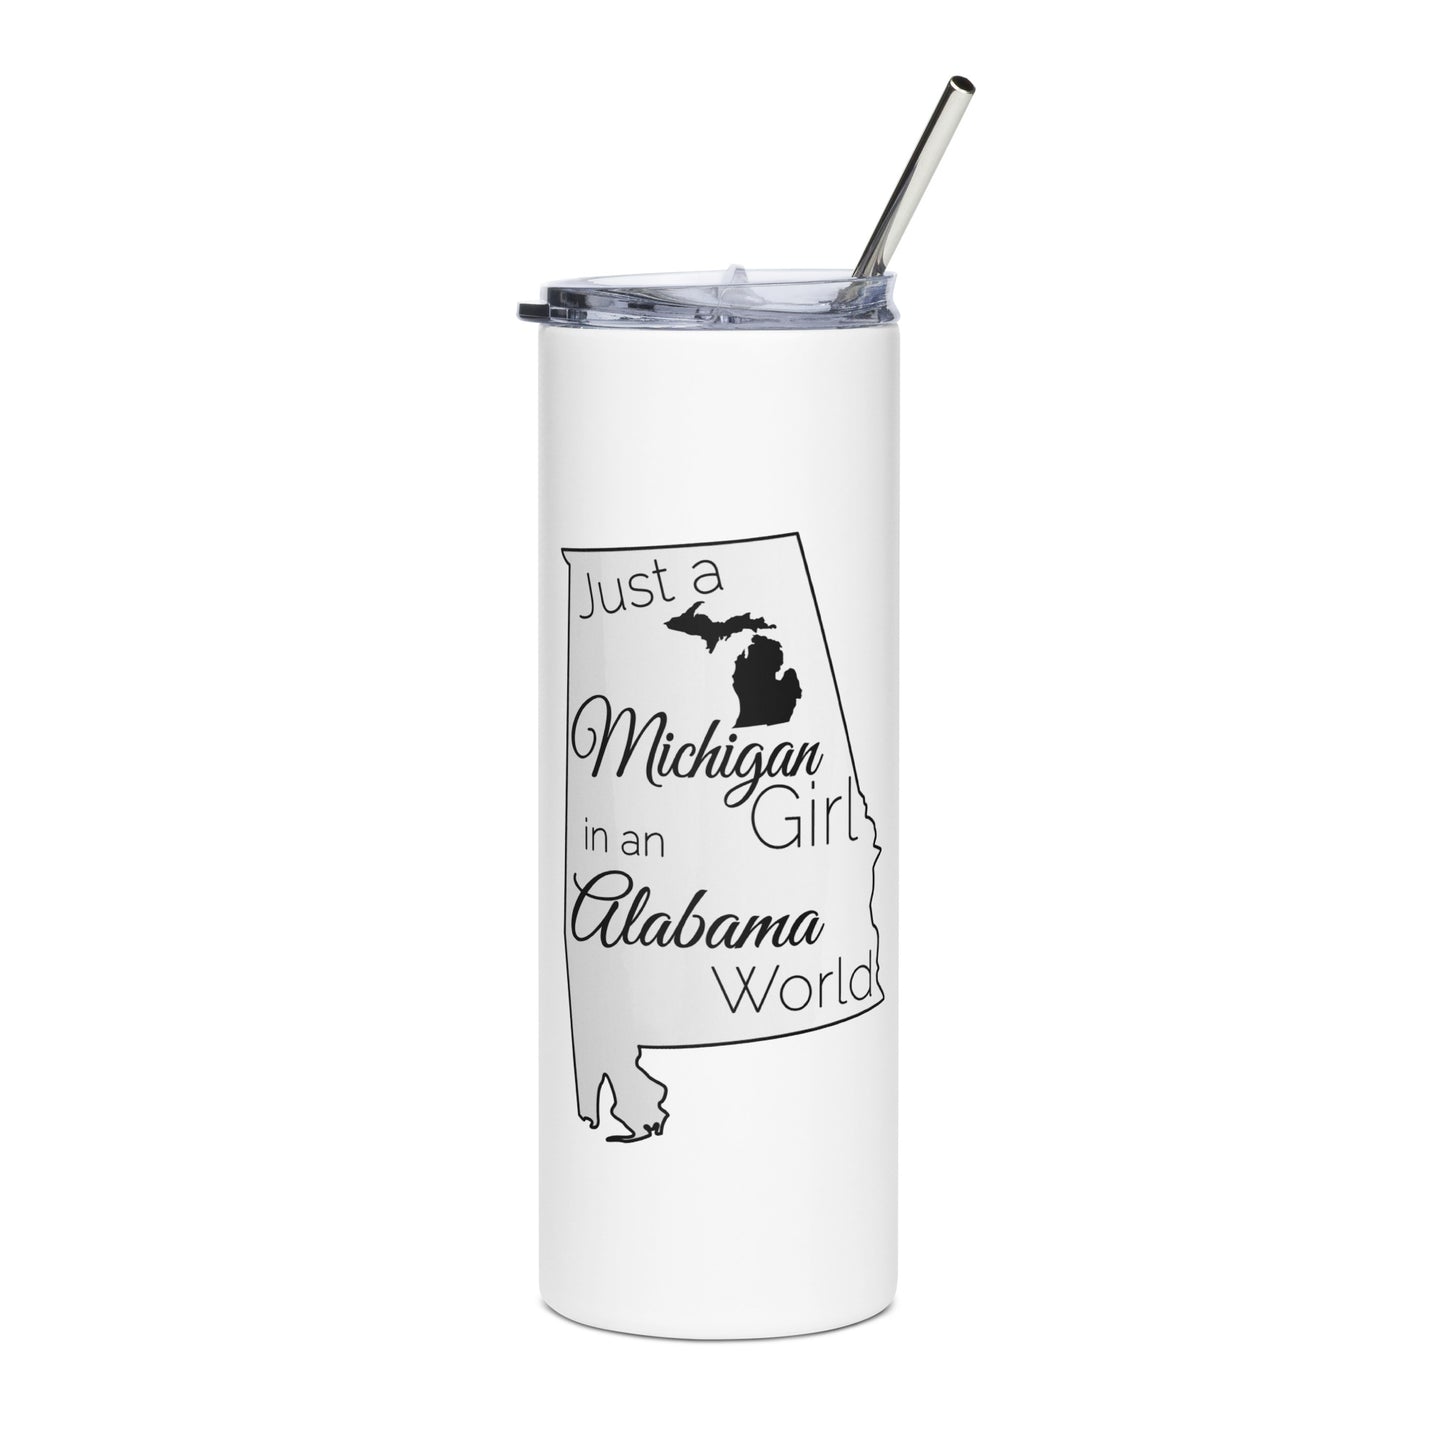 Just a Michigan Girl in an Alabama World Stainless steel tumbler